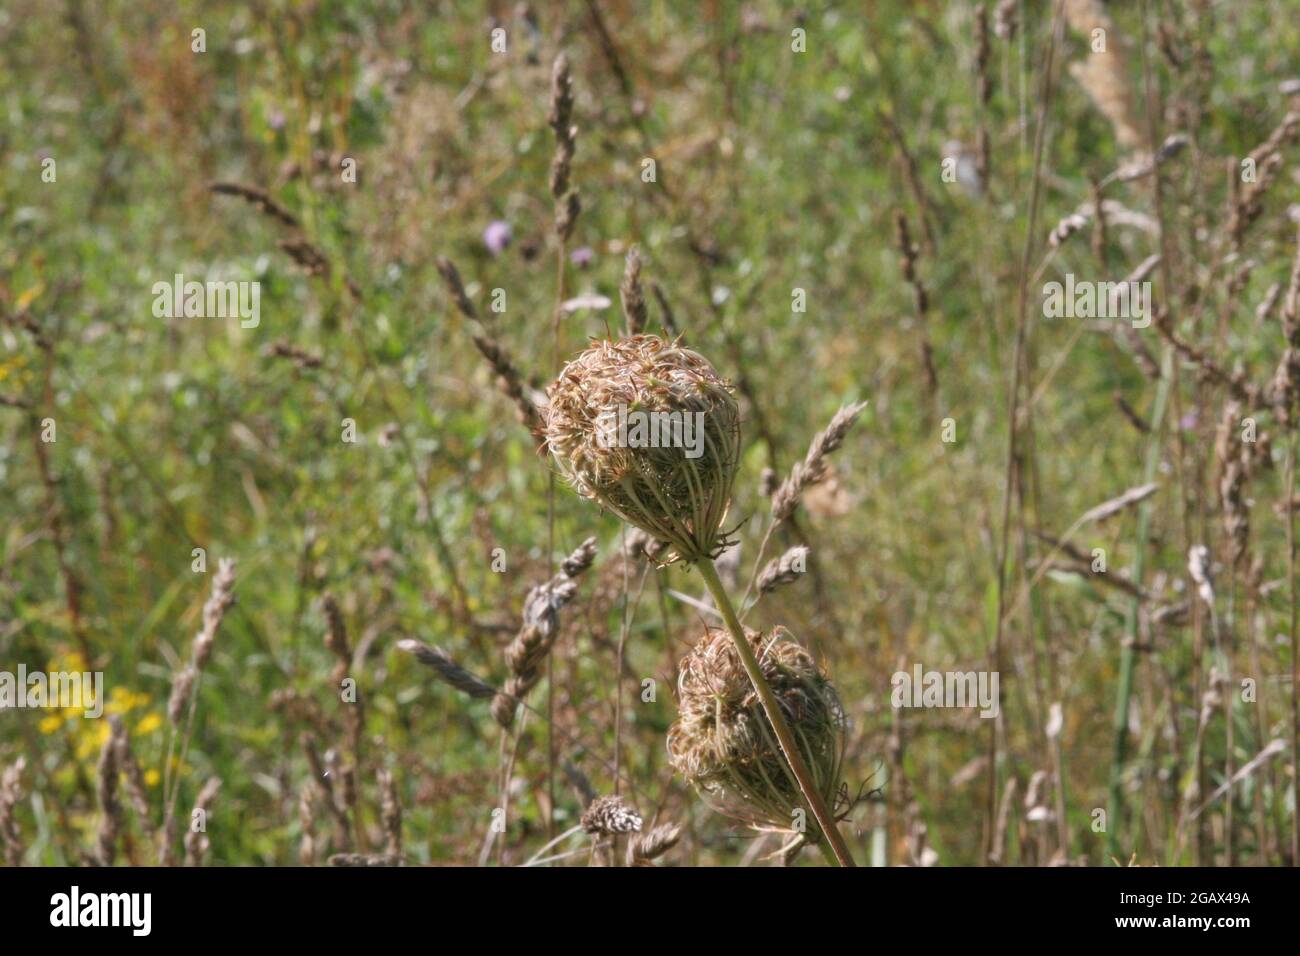 Thistles, carduus nutans, blossom thistles, arvensis, calcalereous, Stock Photo